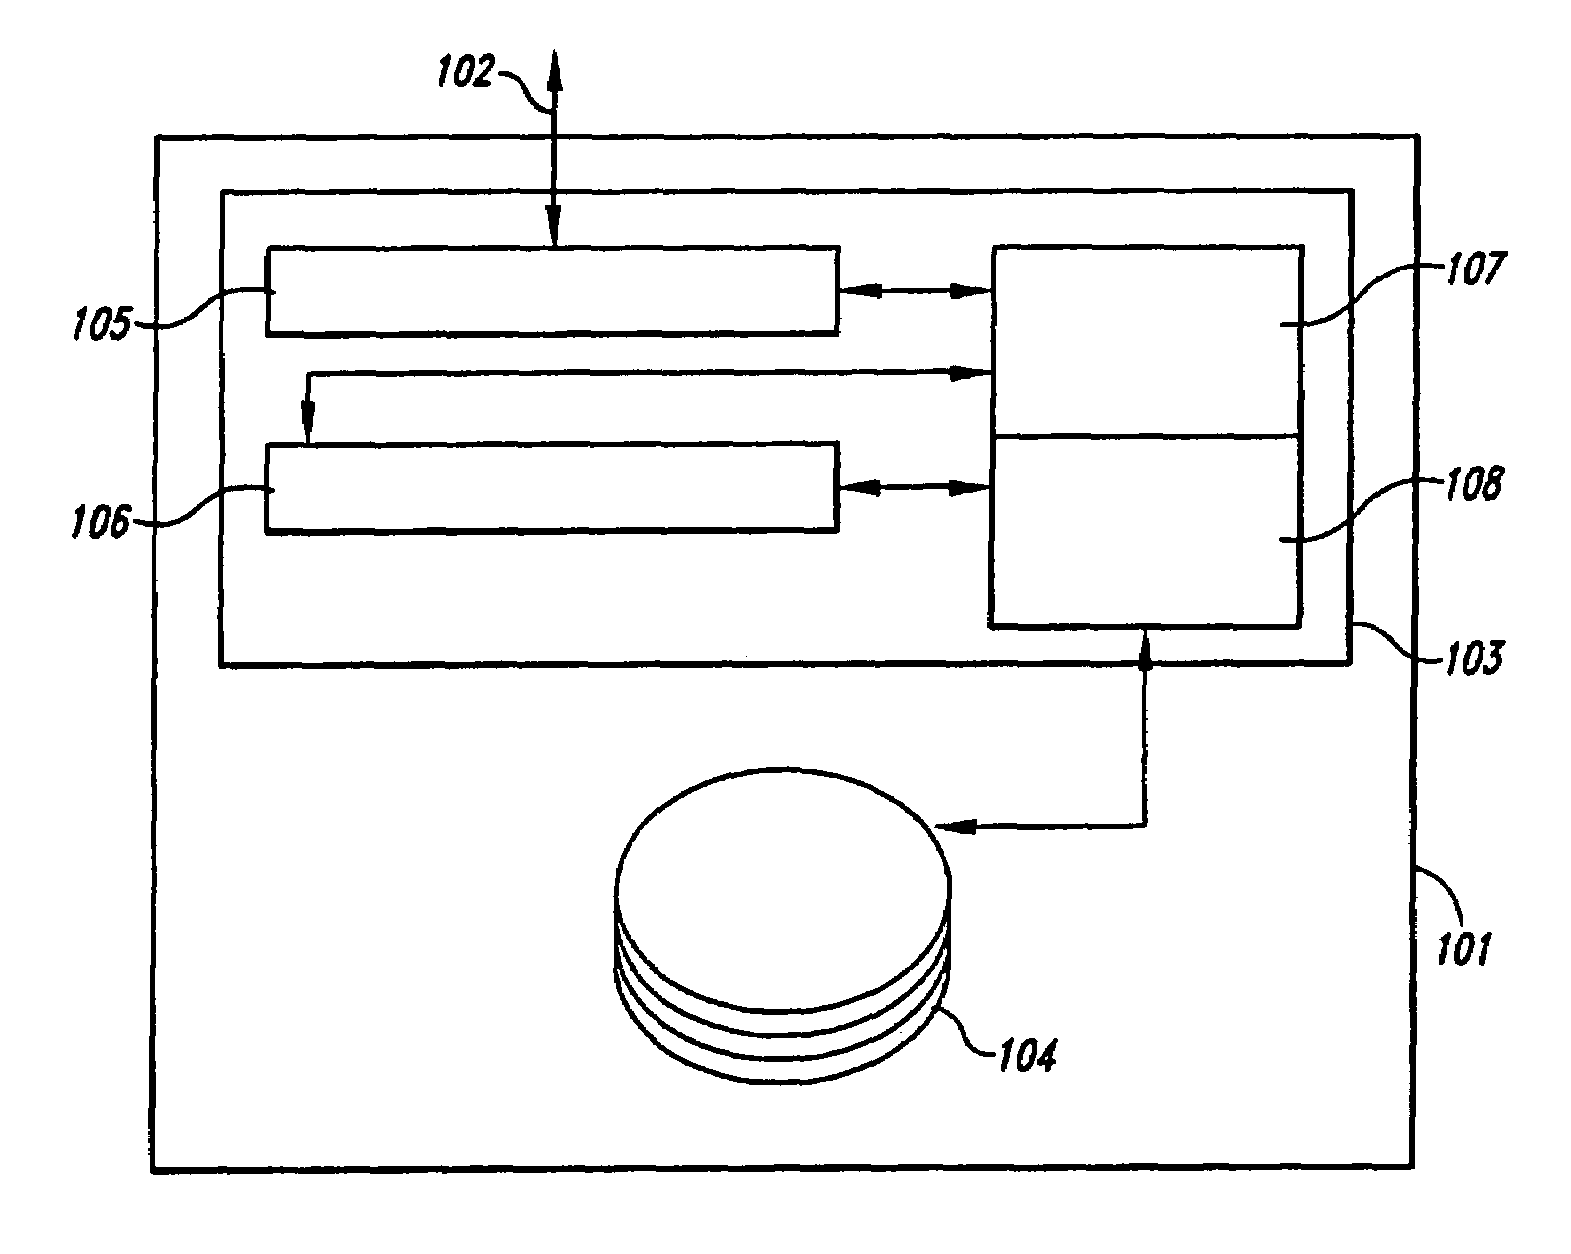 Method and system for throttling I/O request servicing on behalf of an I/O request generator to prevent monopolization of a storage device by the I/O request generator